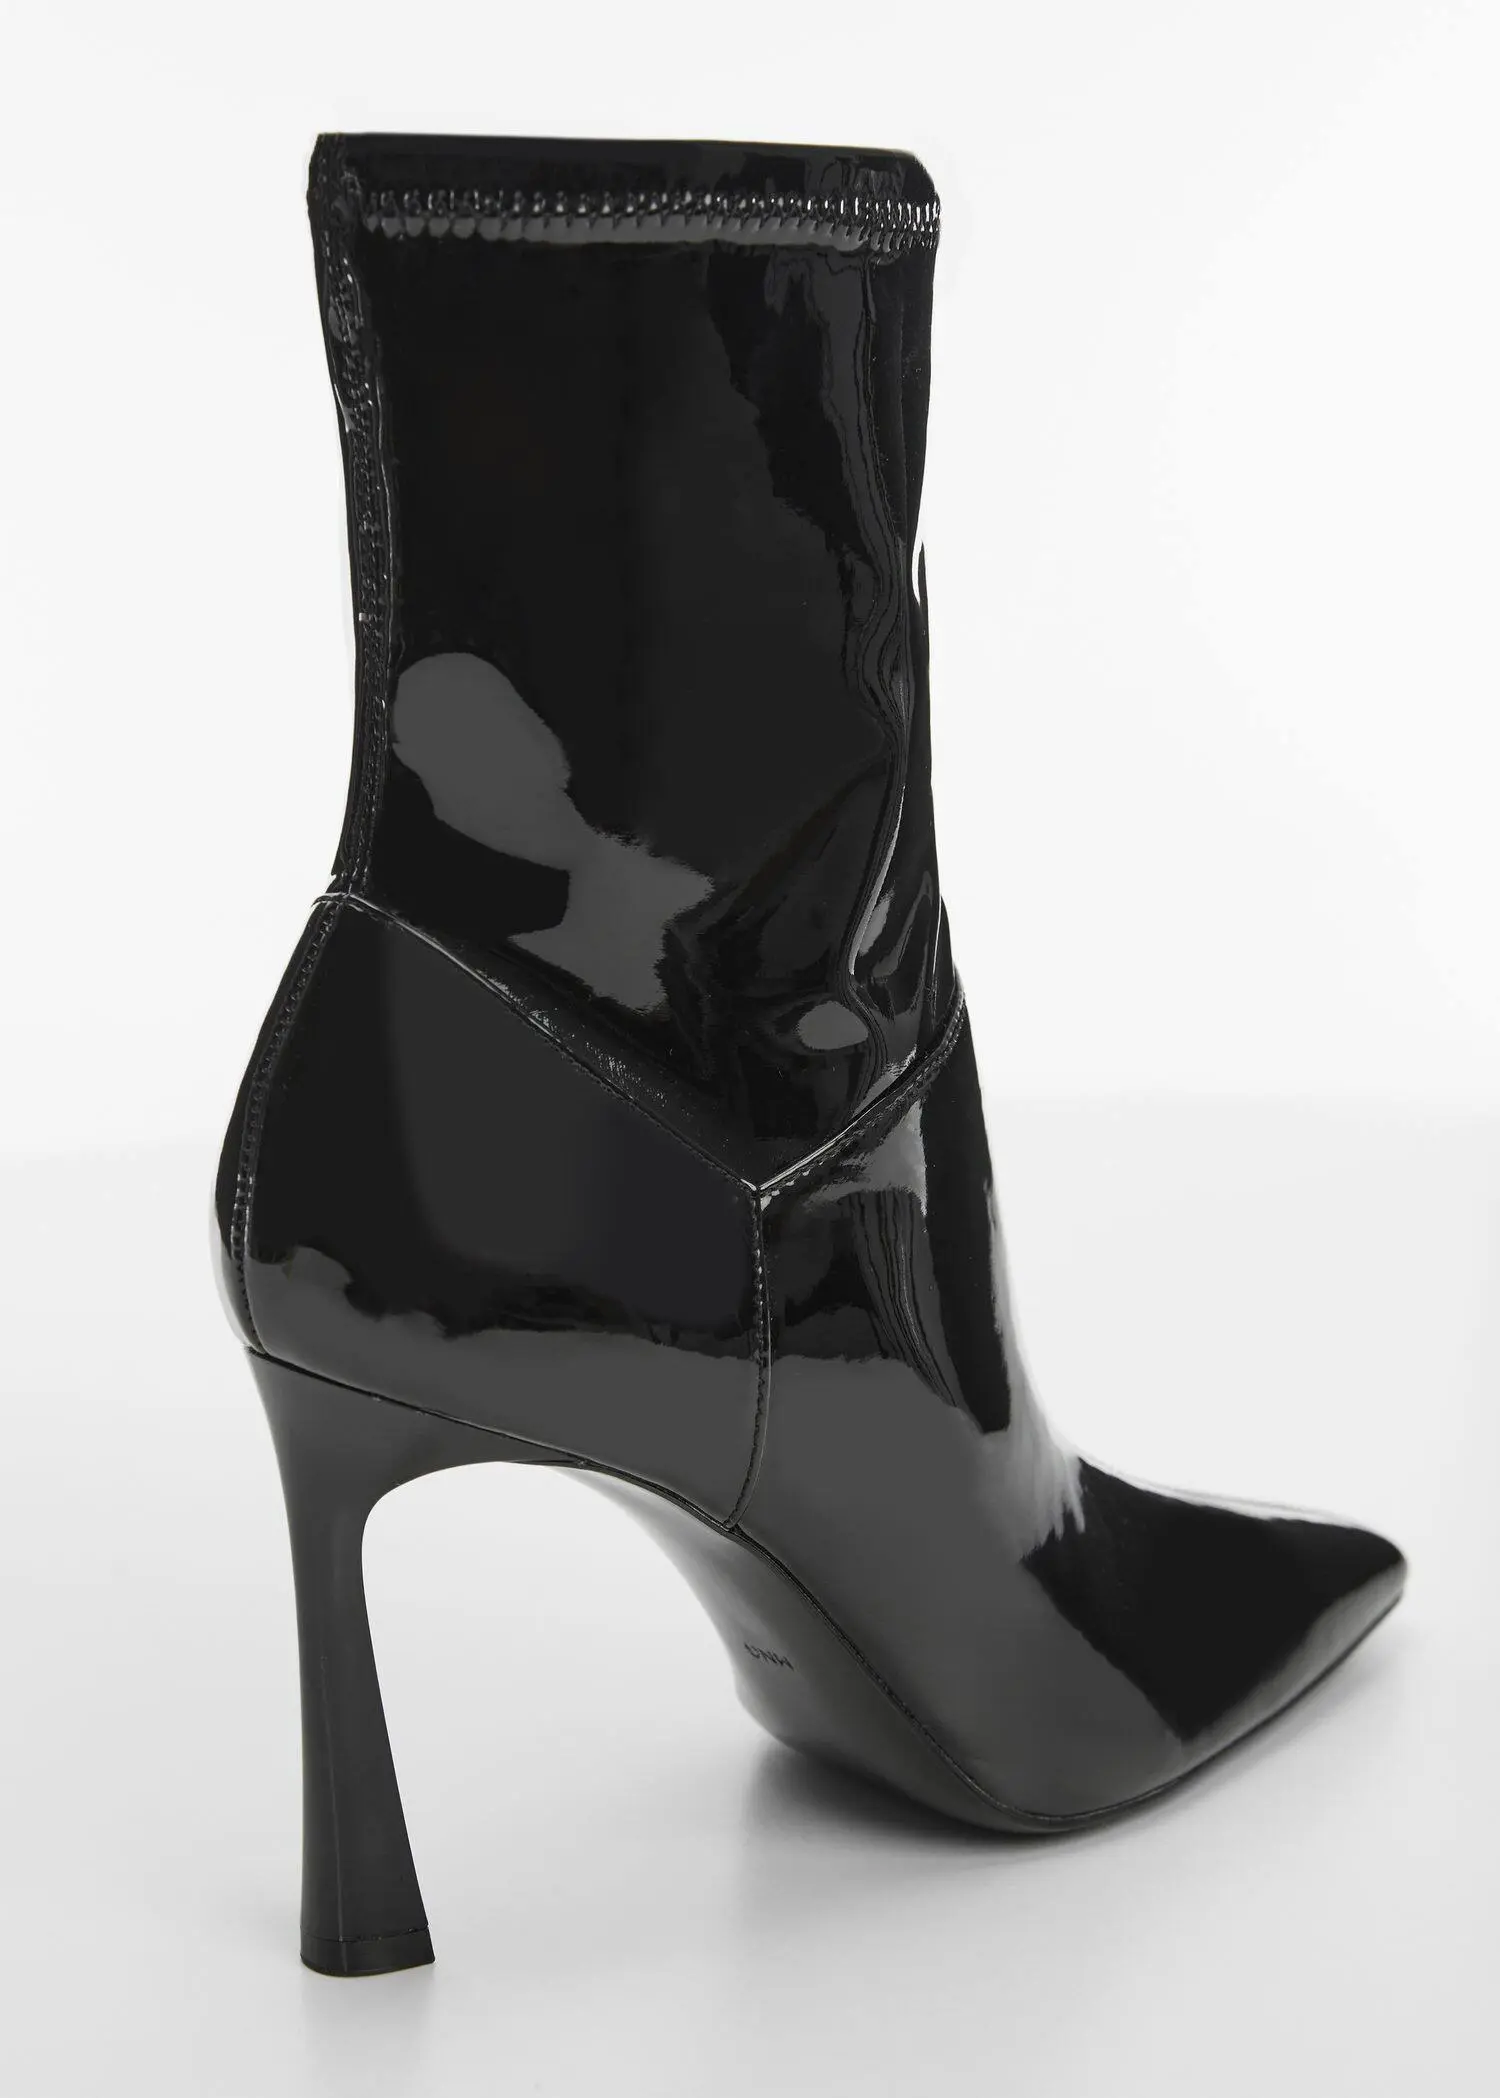 Mango Patent leather-effect heeled ankle boots. 3